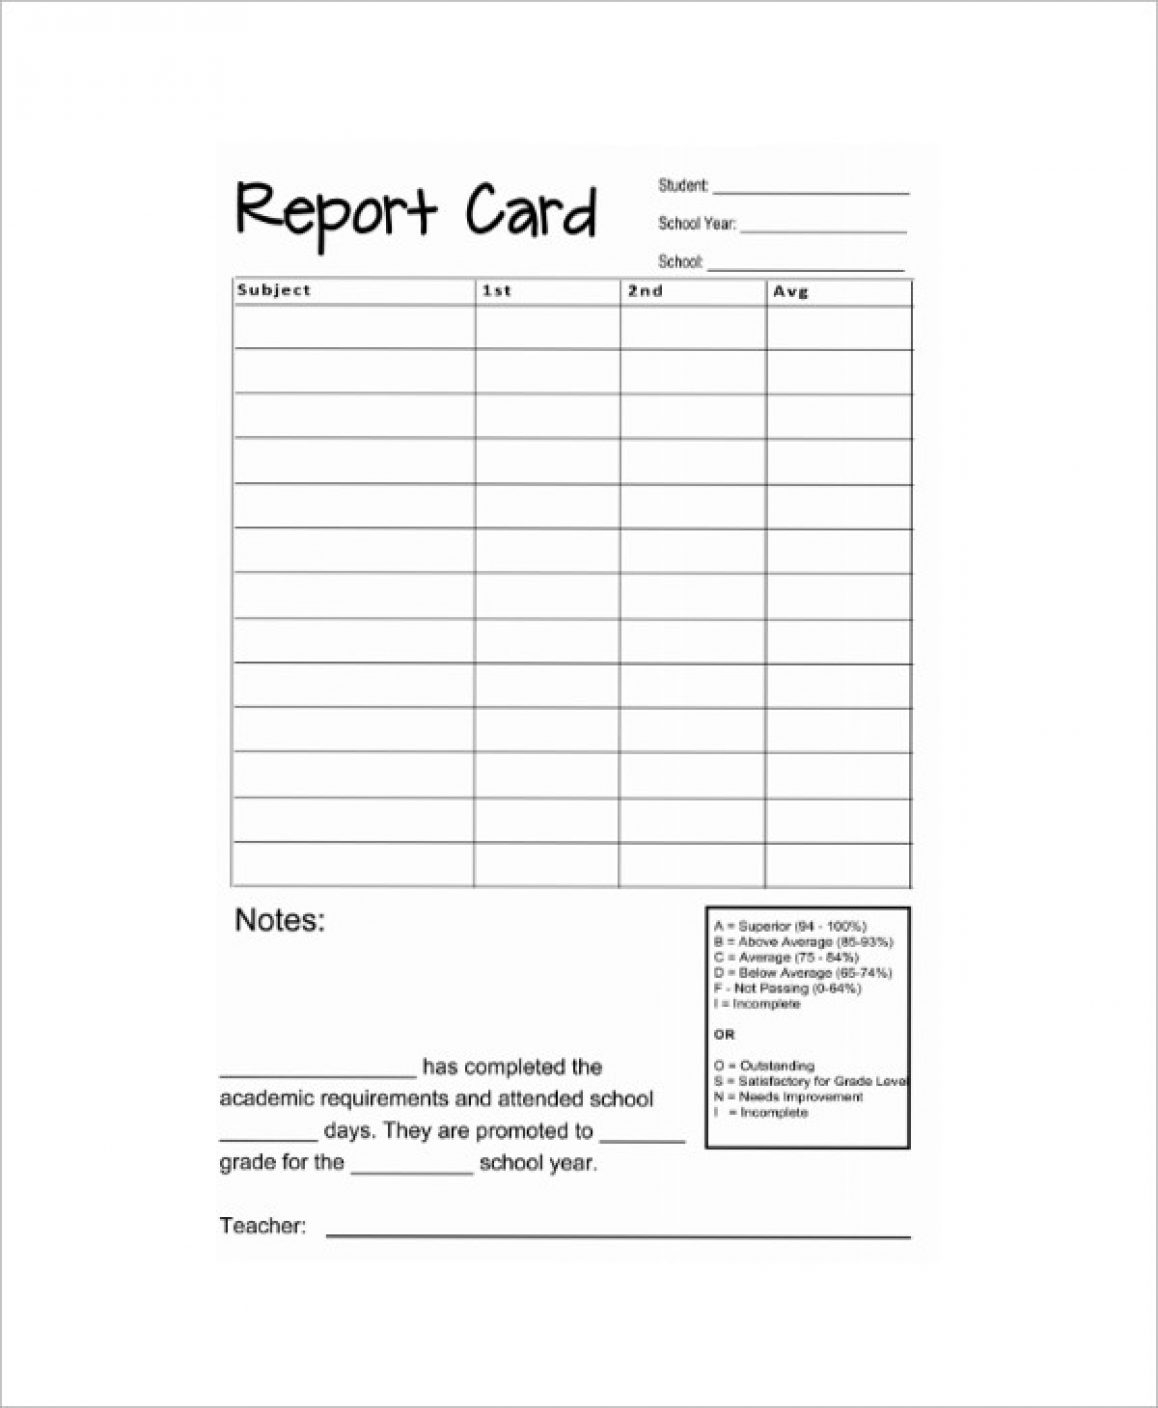 Acceptance Card Template Necessary 10 Sample Report Cards Pertaining To Acceptance Card Template